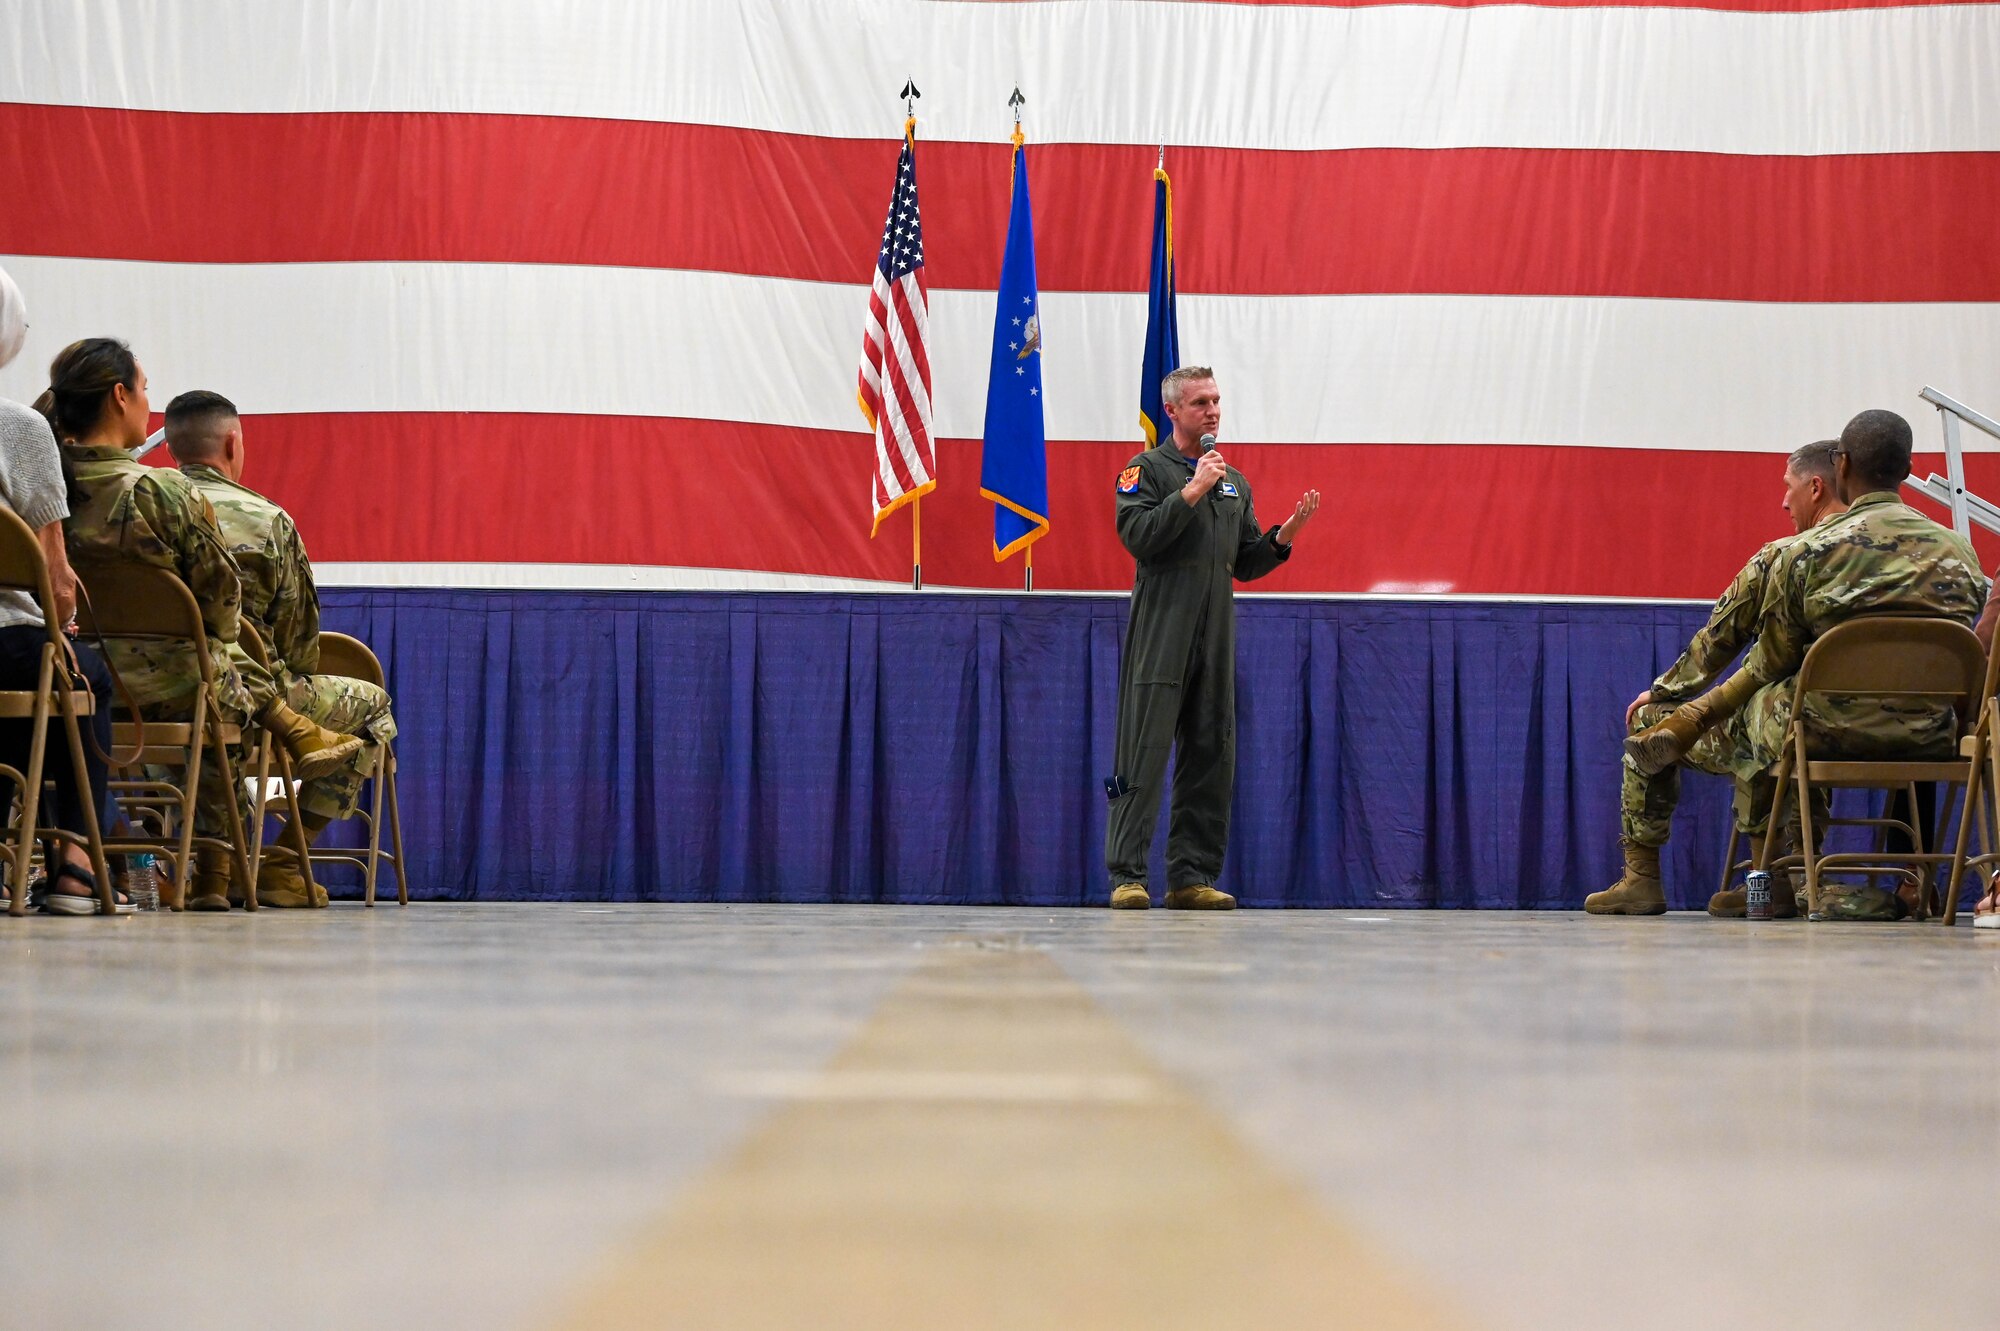 U.S. Air Force Brig. Gen. Jason Rueschoff, 56th Fighter Wing commander, addresses attendees of the 2022 honorary commander induction ceremony, Oct. 14, 2022, at Luke Air Force Base, Arizona.